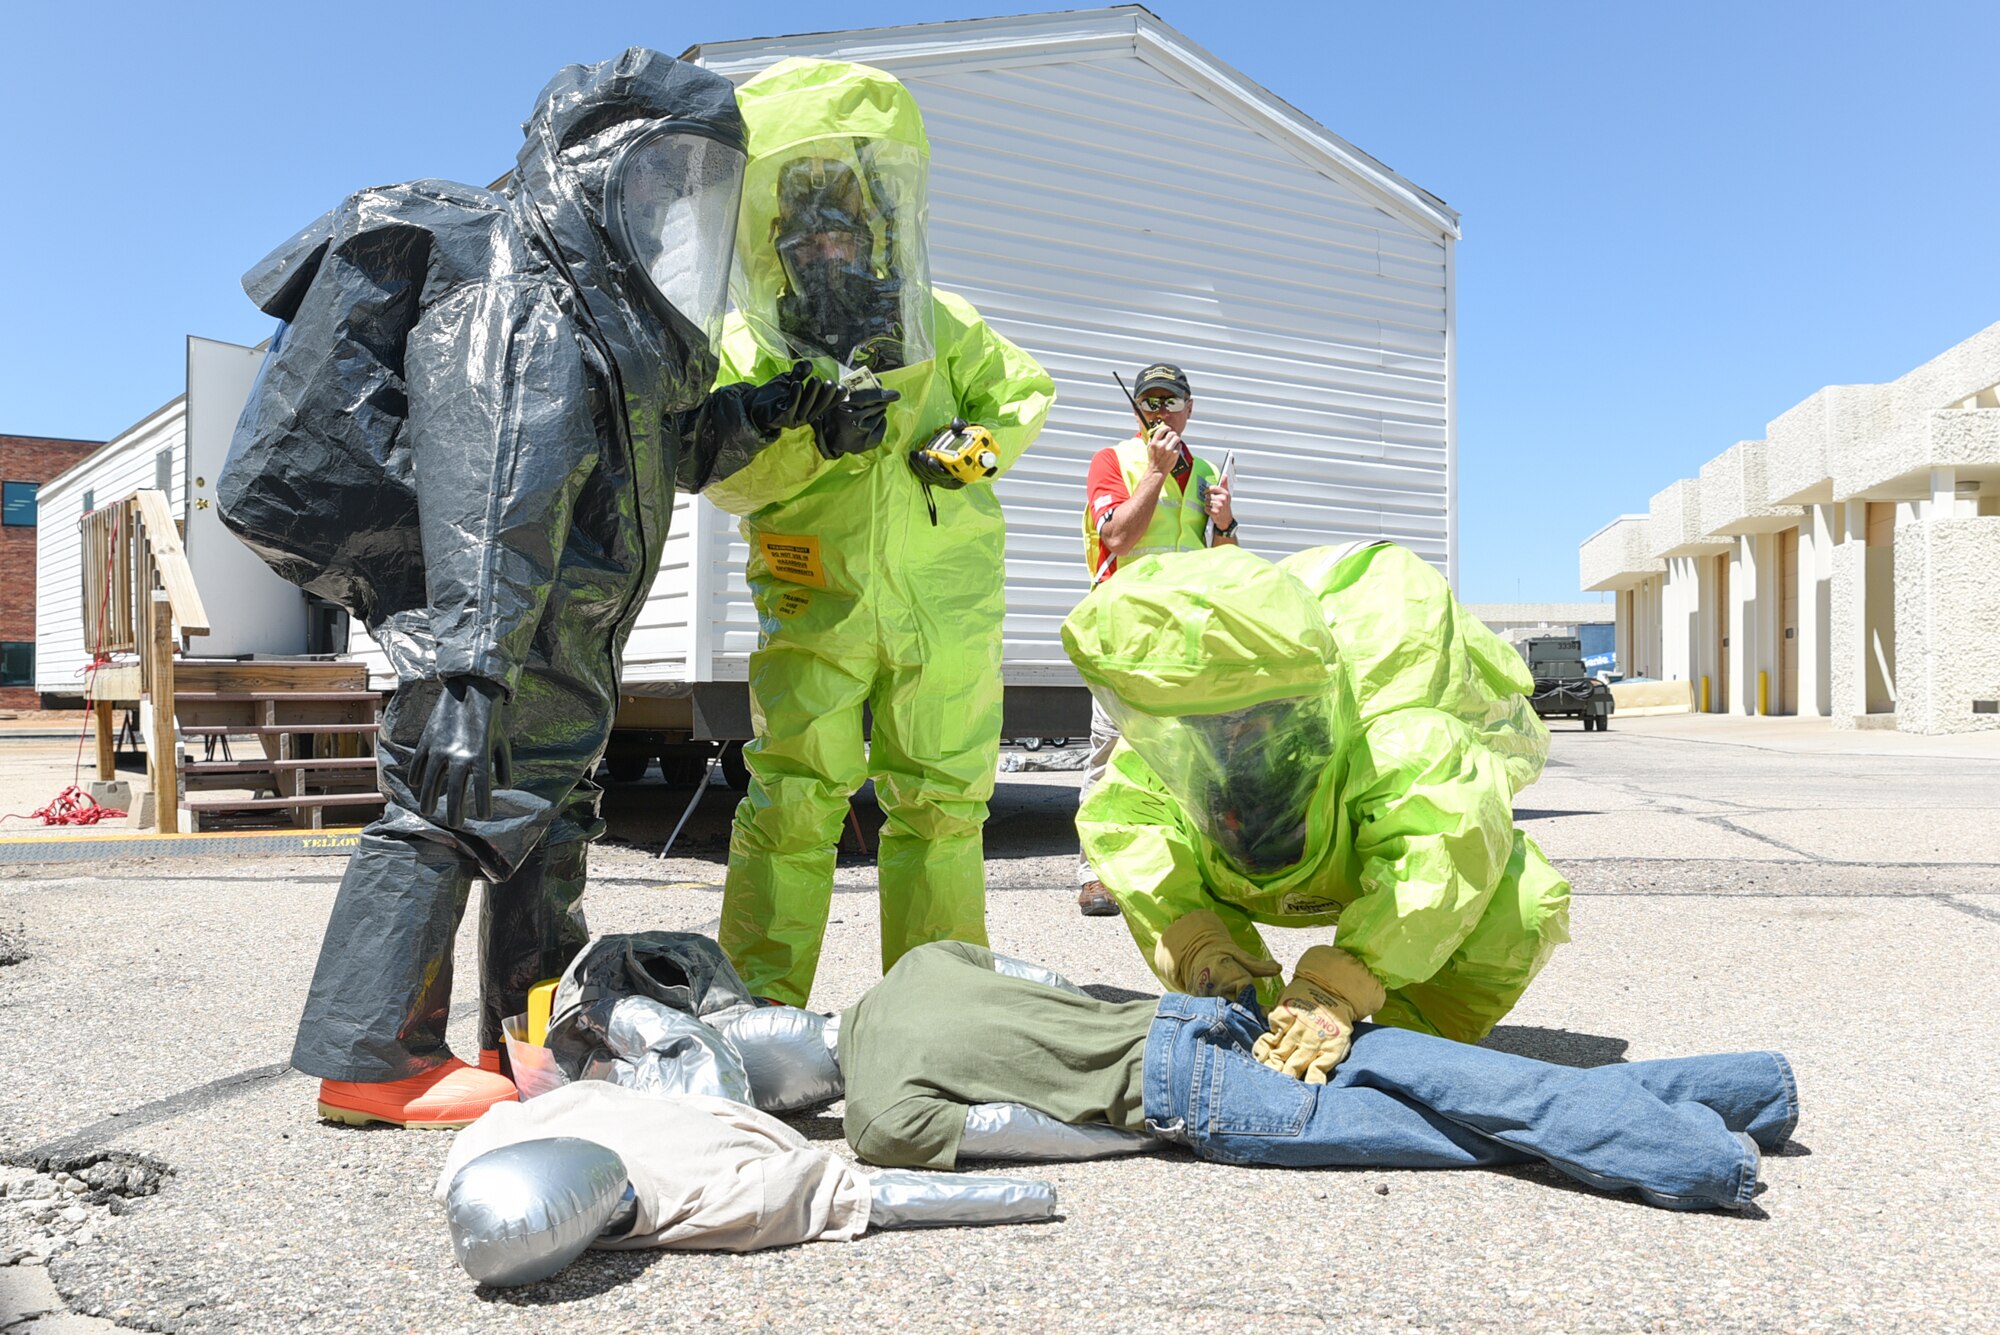 U.S. Air Force Staff Sgt. Farooq Durrani, 153rd Bioenvironmental Engineering, Senior Airman Collin Holte, 153rd Emergency Management, and Brent Osborne, Cheyenne Region 7 Hazmat, tend to simulated chlorine contaminated victims, June 19, 2015, at Cheyenne Air National Guard Base in Cheyenne, Wyo. Durrani, Holte, and Osborne are participating in Counter-CBRN All-Hazard Management Response (CAMR) training with civilian and military first responders to practice chemical, biological, radiological, first response, medical, and incident command scenarios for possible threats in the region. (U.S. Air National Guard photo by Master Sgt. Charles Delano)